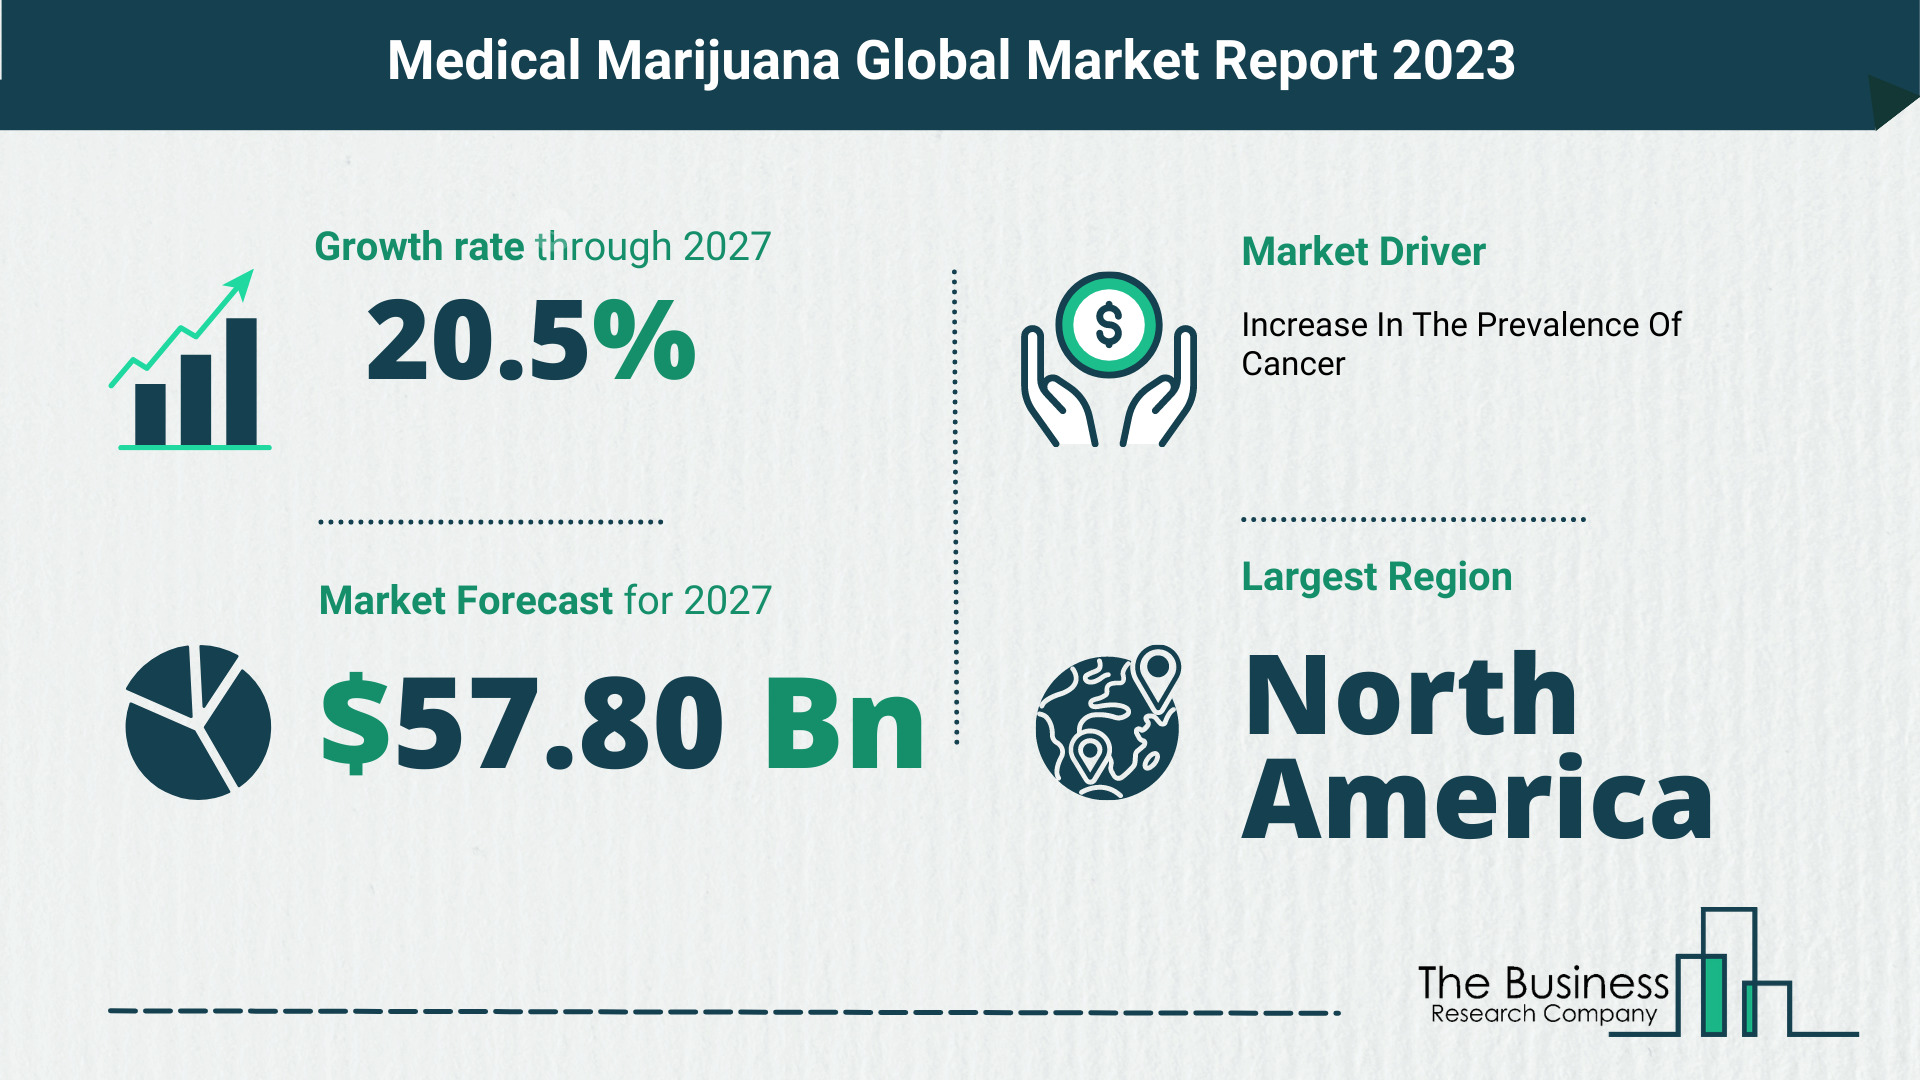 What Will The Medical Marijuana Market Look Like In 2023?